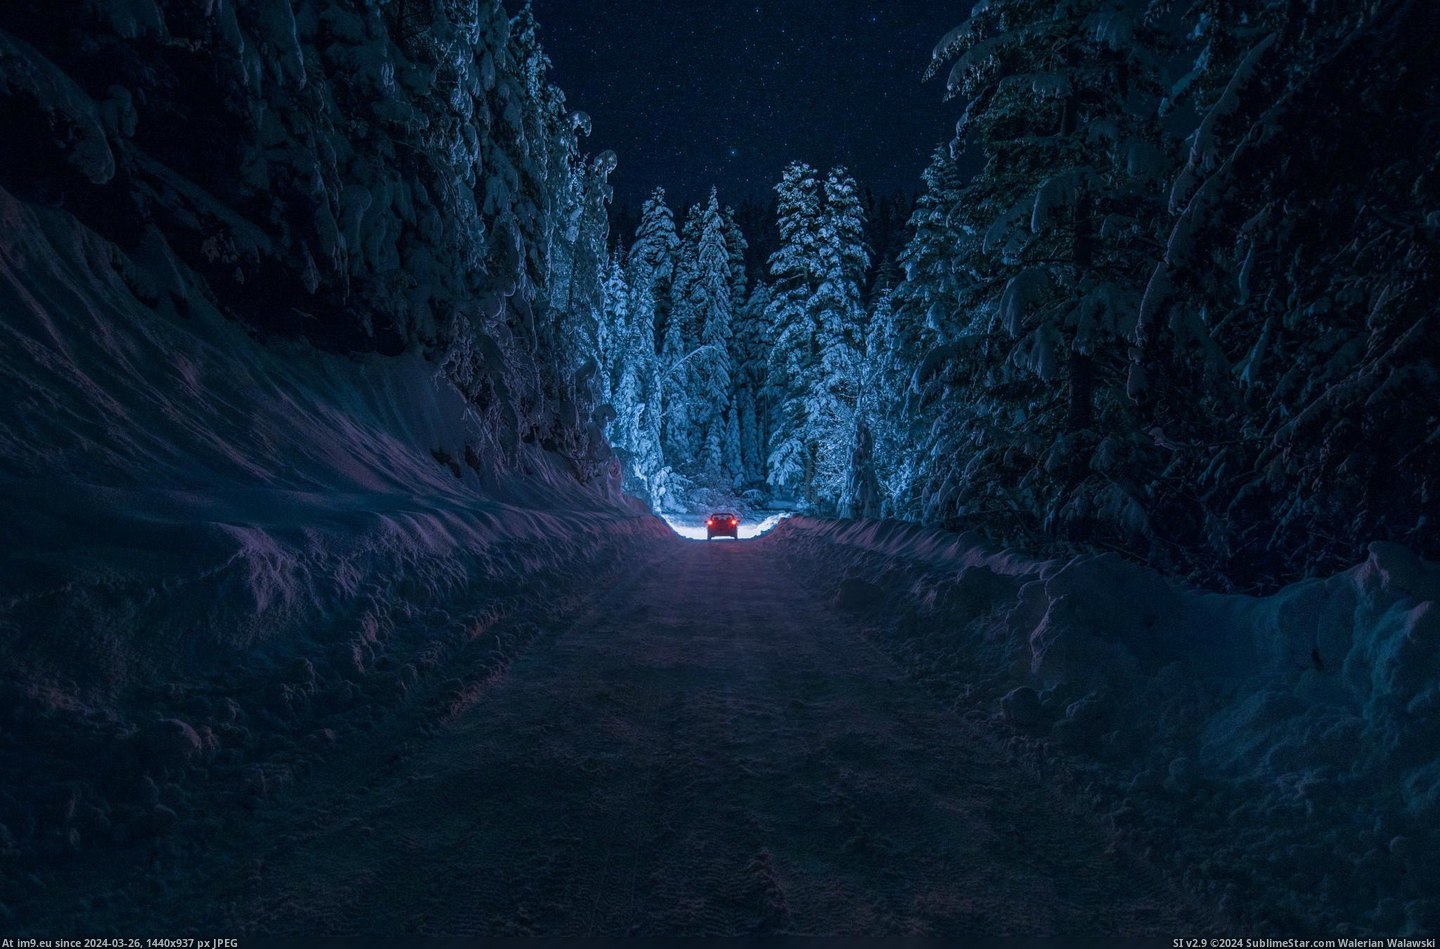 #Forest #Snowy #Peaceful #Driving [Pics] Driving through a very peaceful snowy forest. Pic. (Image of album My r/PICS favs))